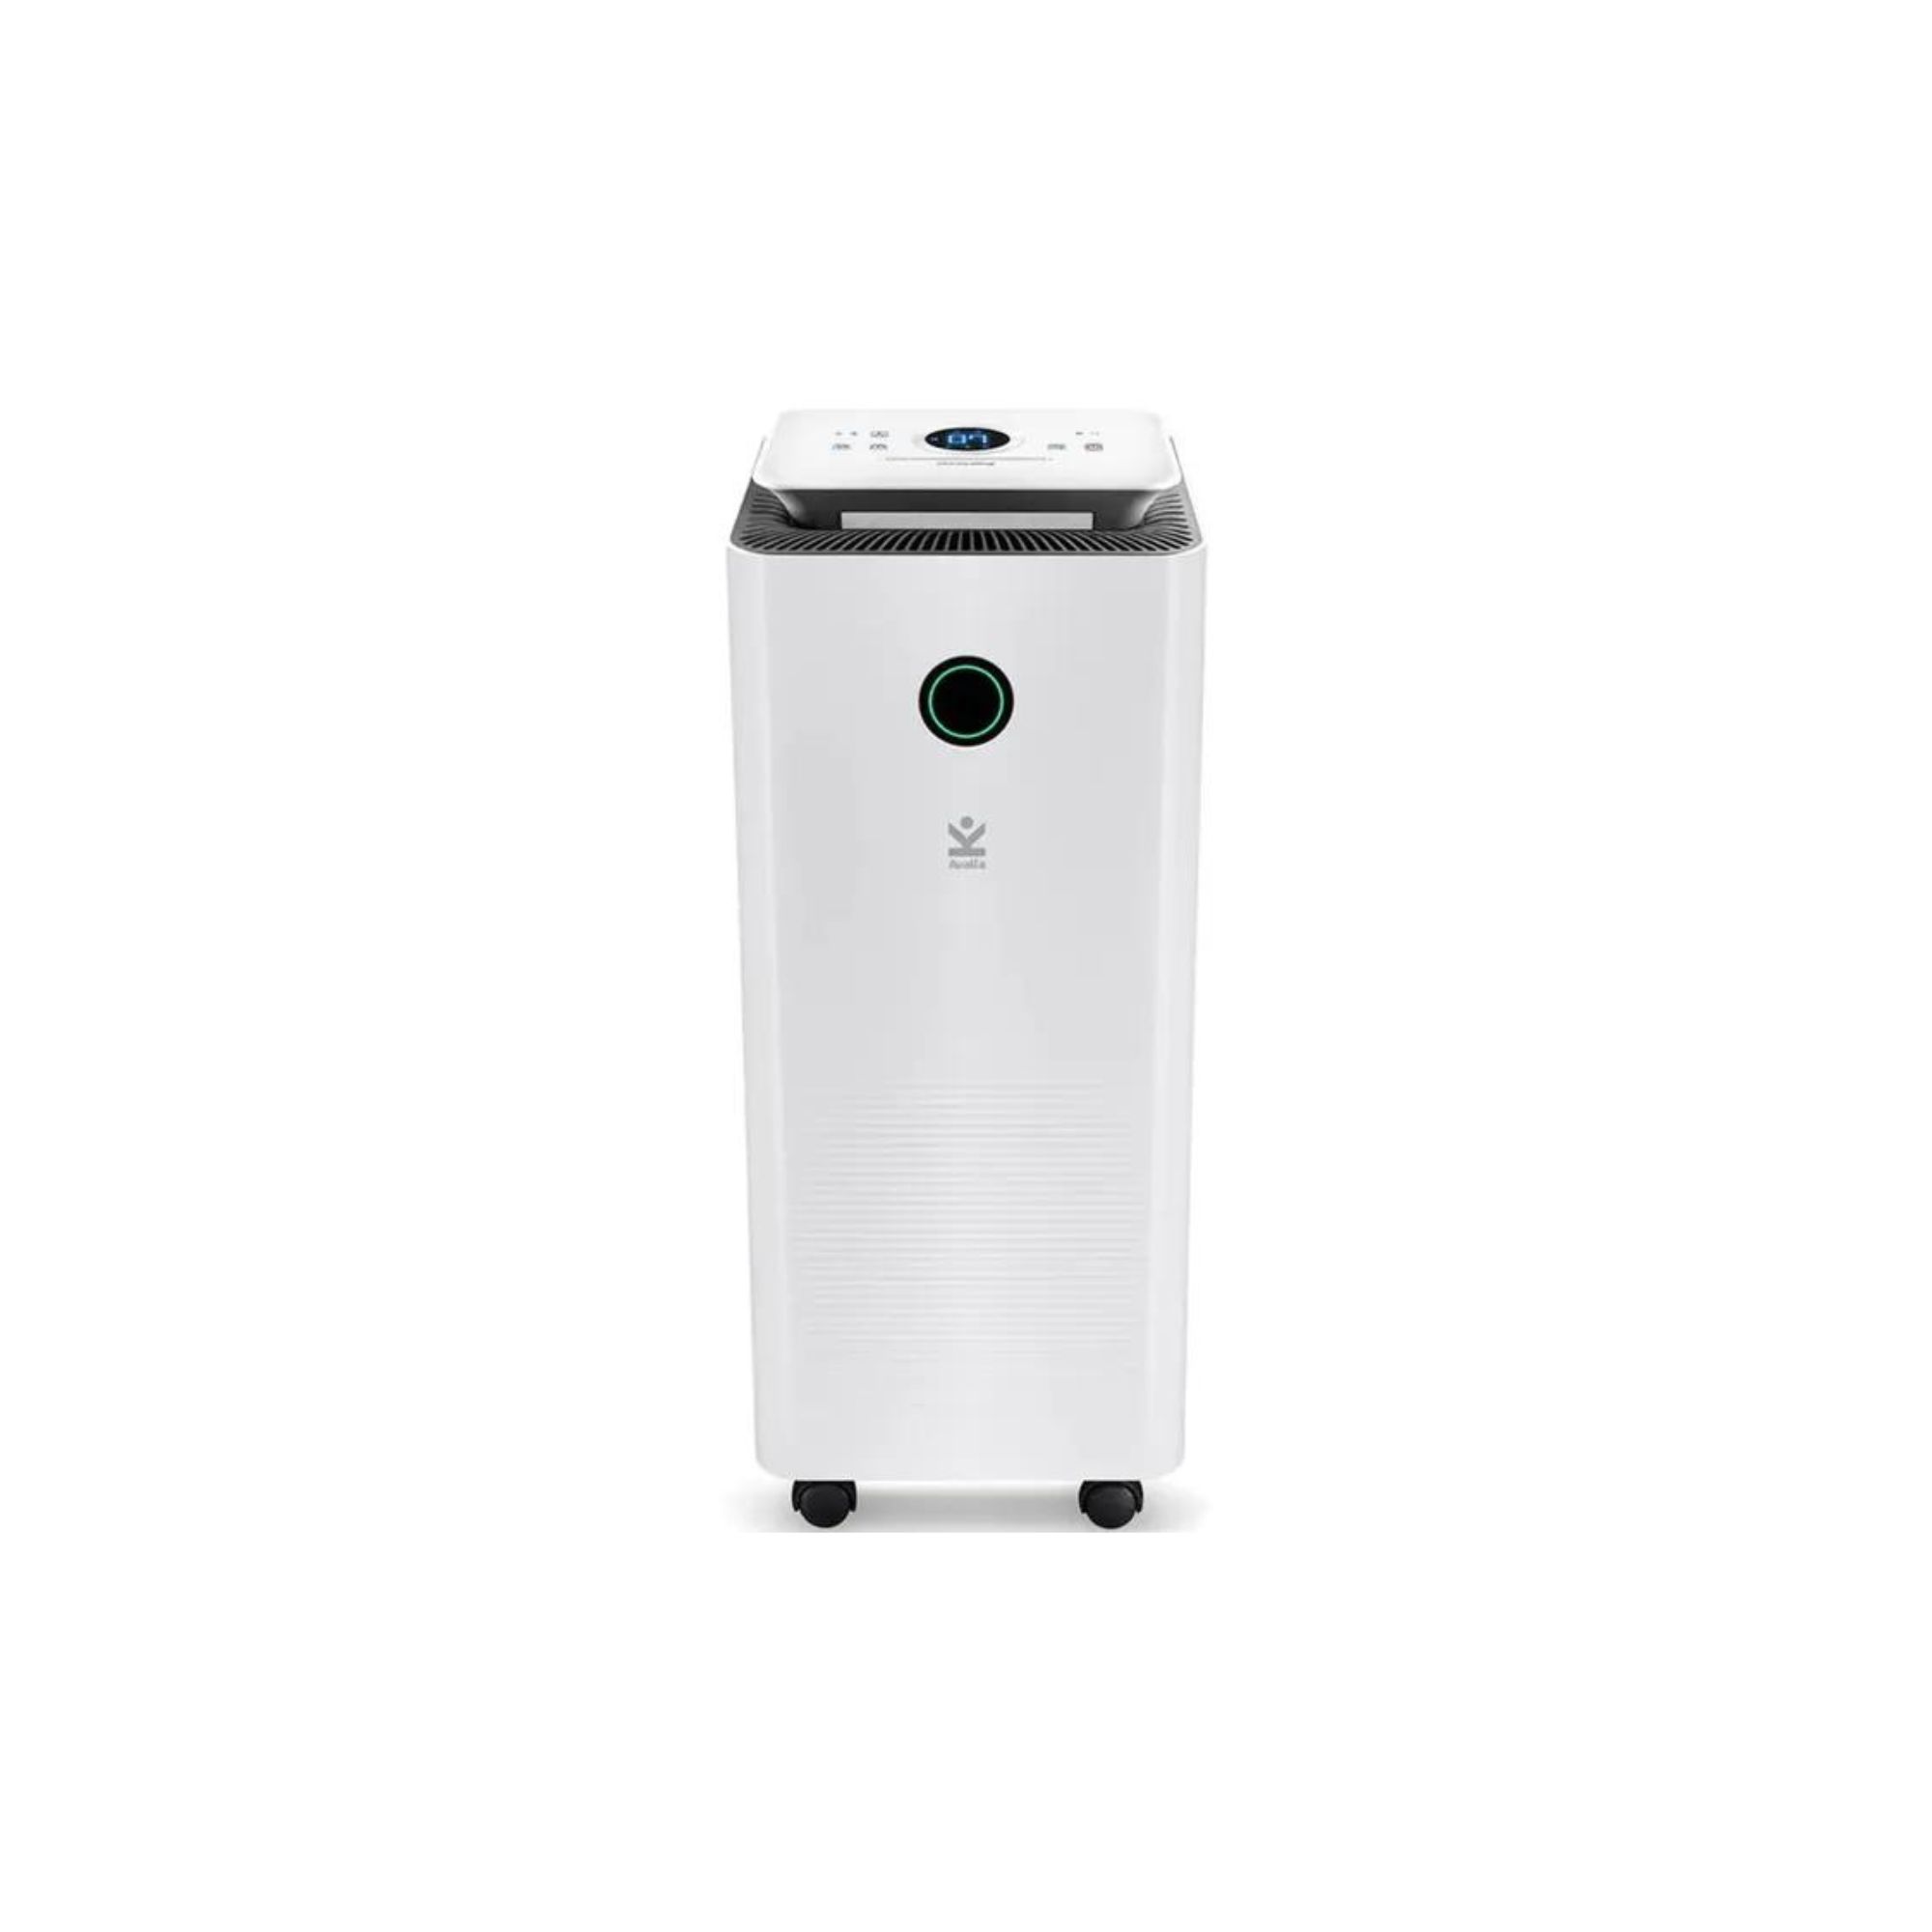 The Avalla X-150 is the overall best dehumidifier.